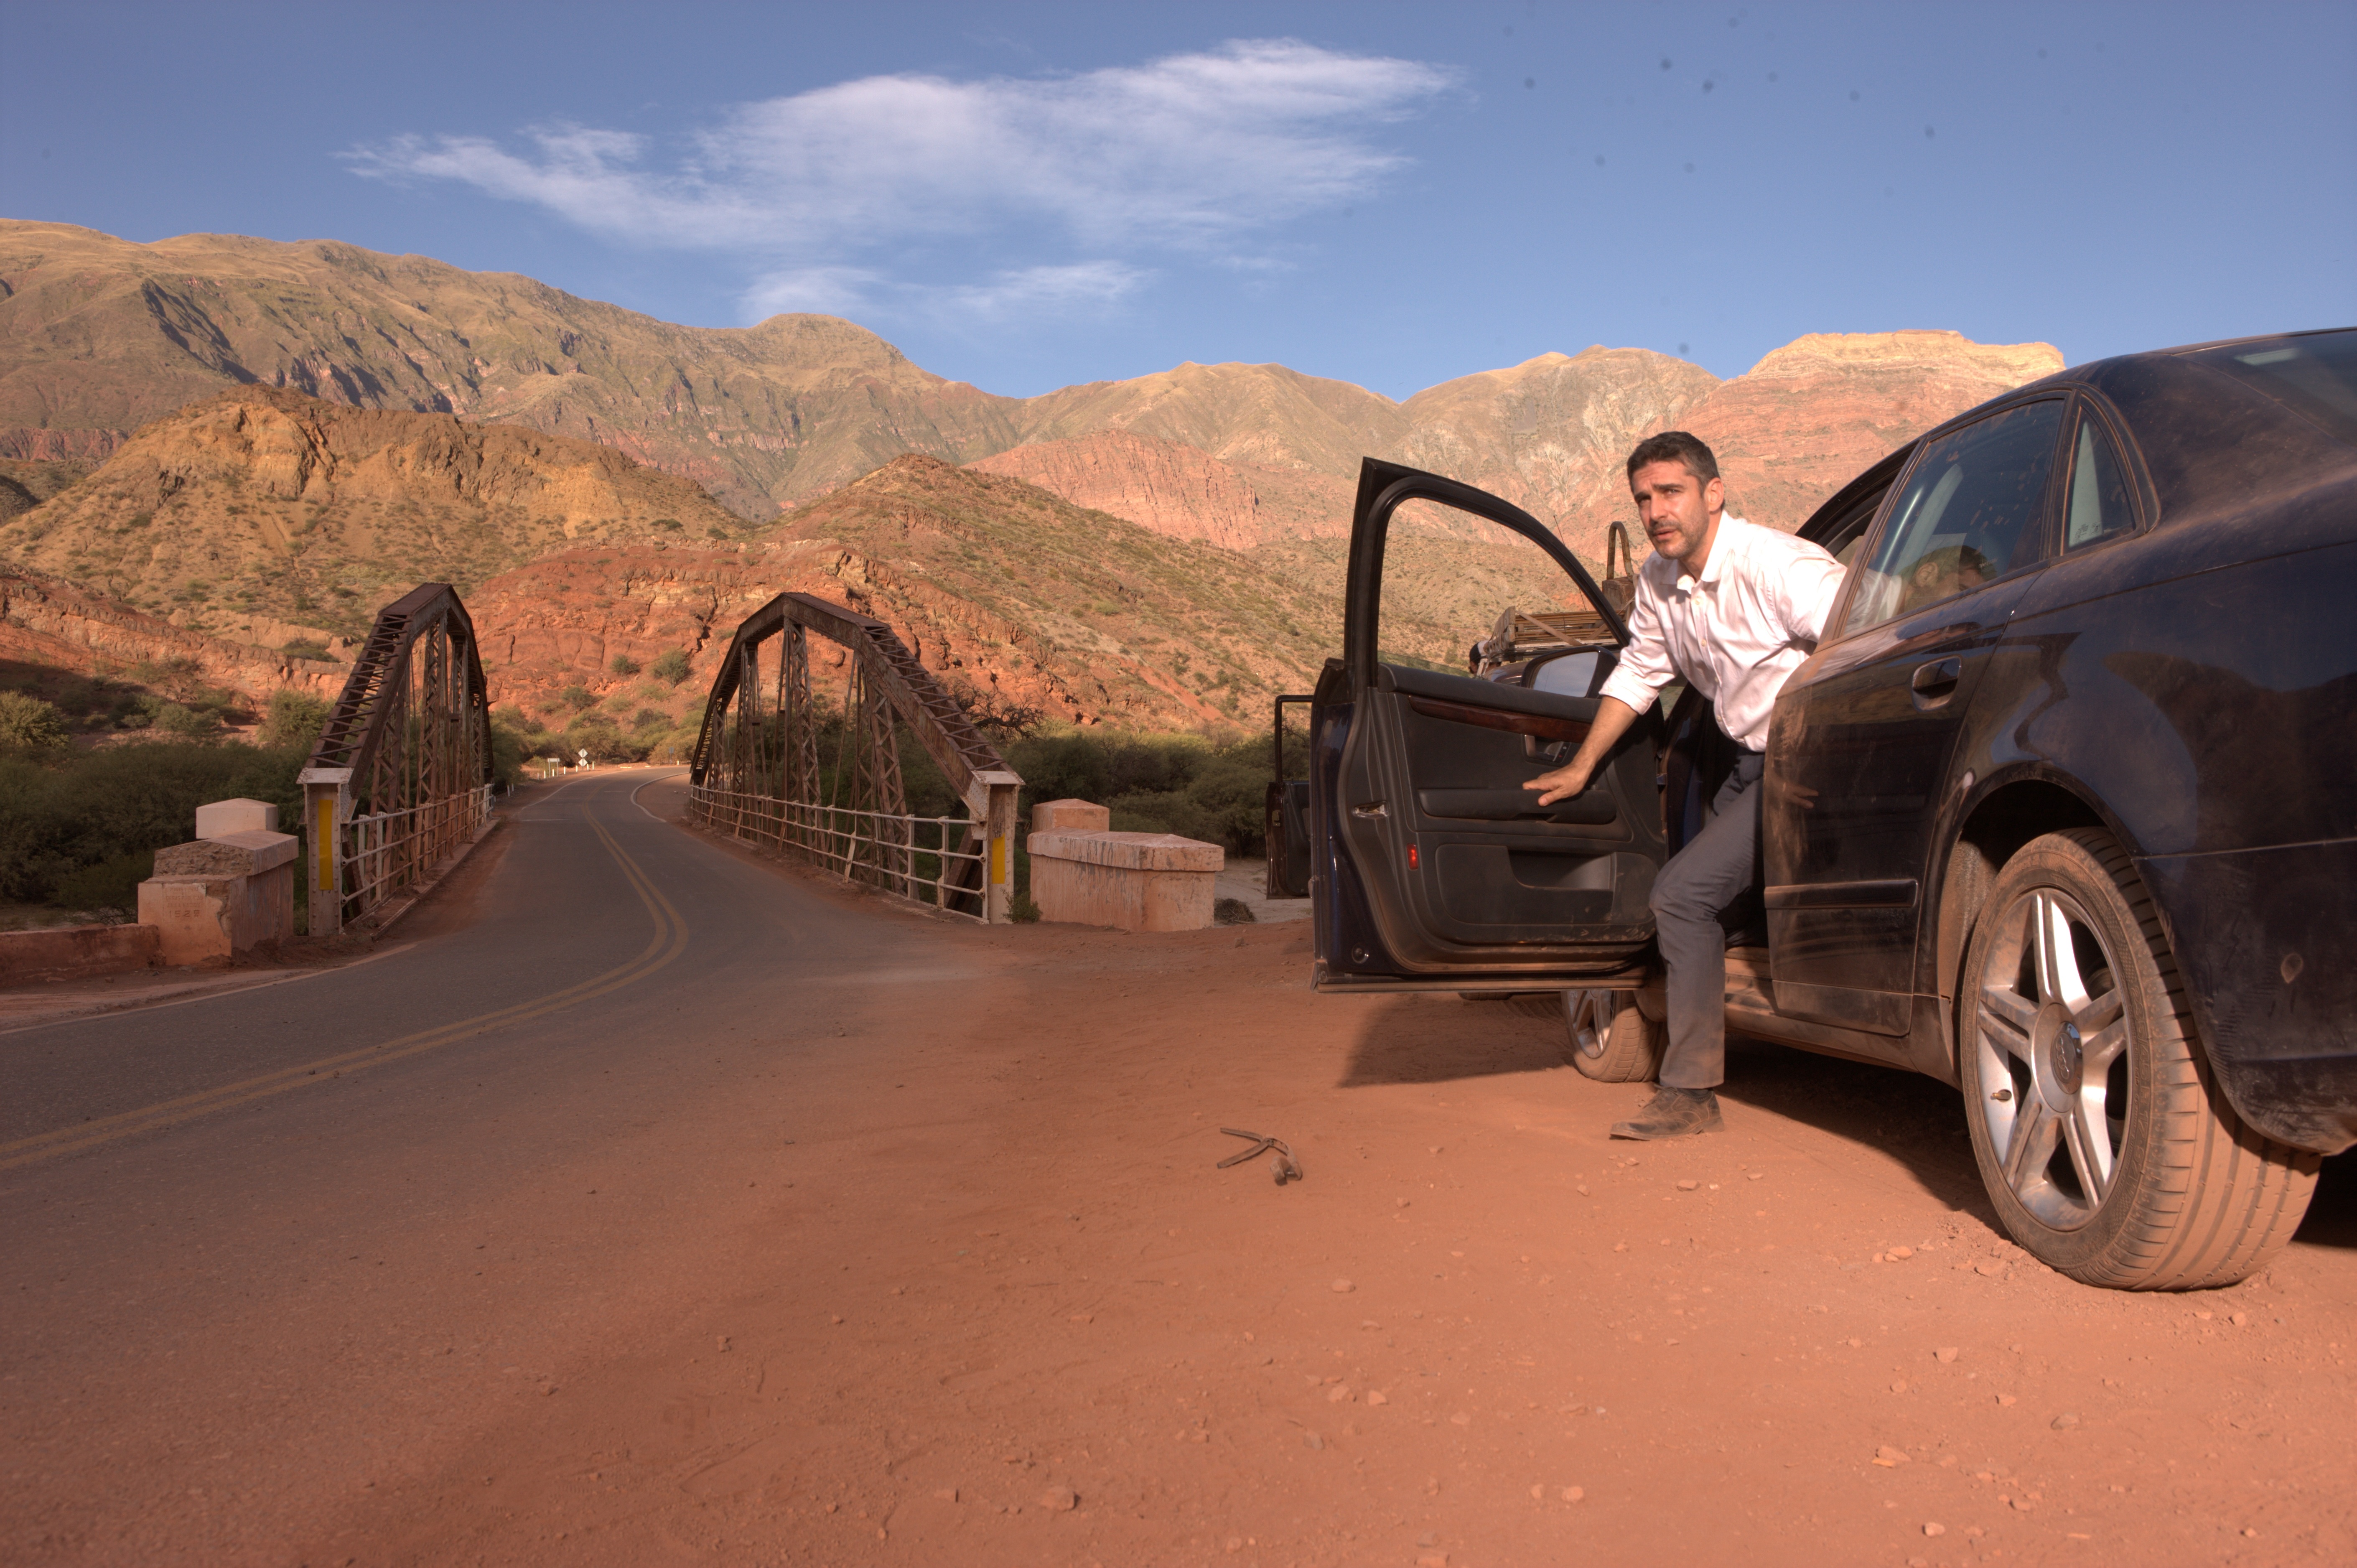 Don't get out of the car! Sbaraglia in the “Road to Hell” episode.Sony Pictures Classics